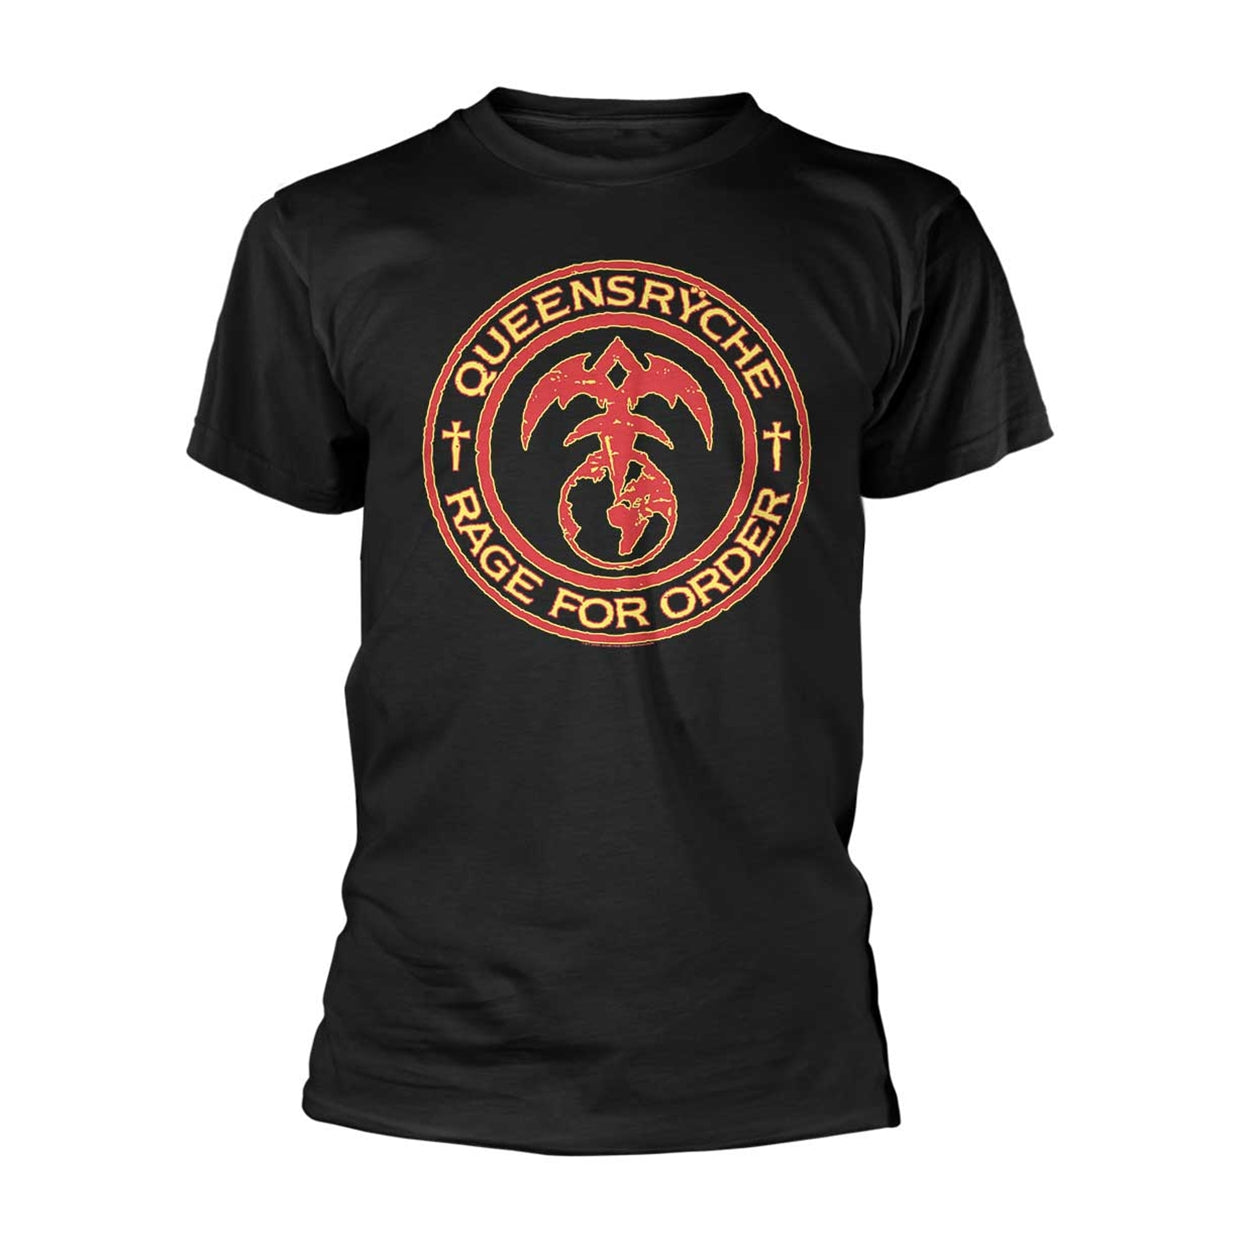 Queensryche "Rage For Order" T shirt